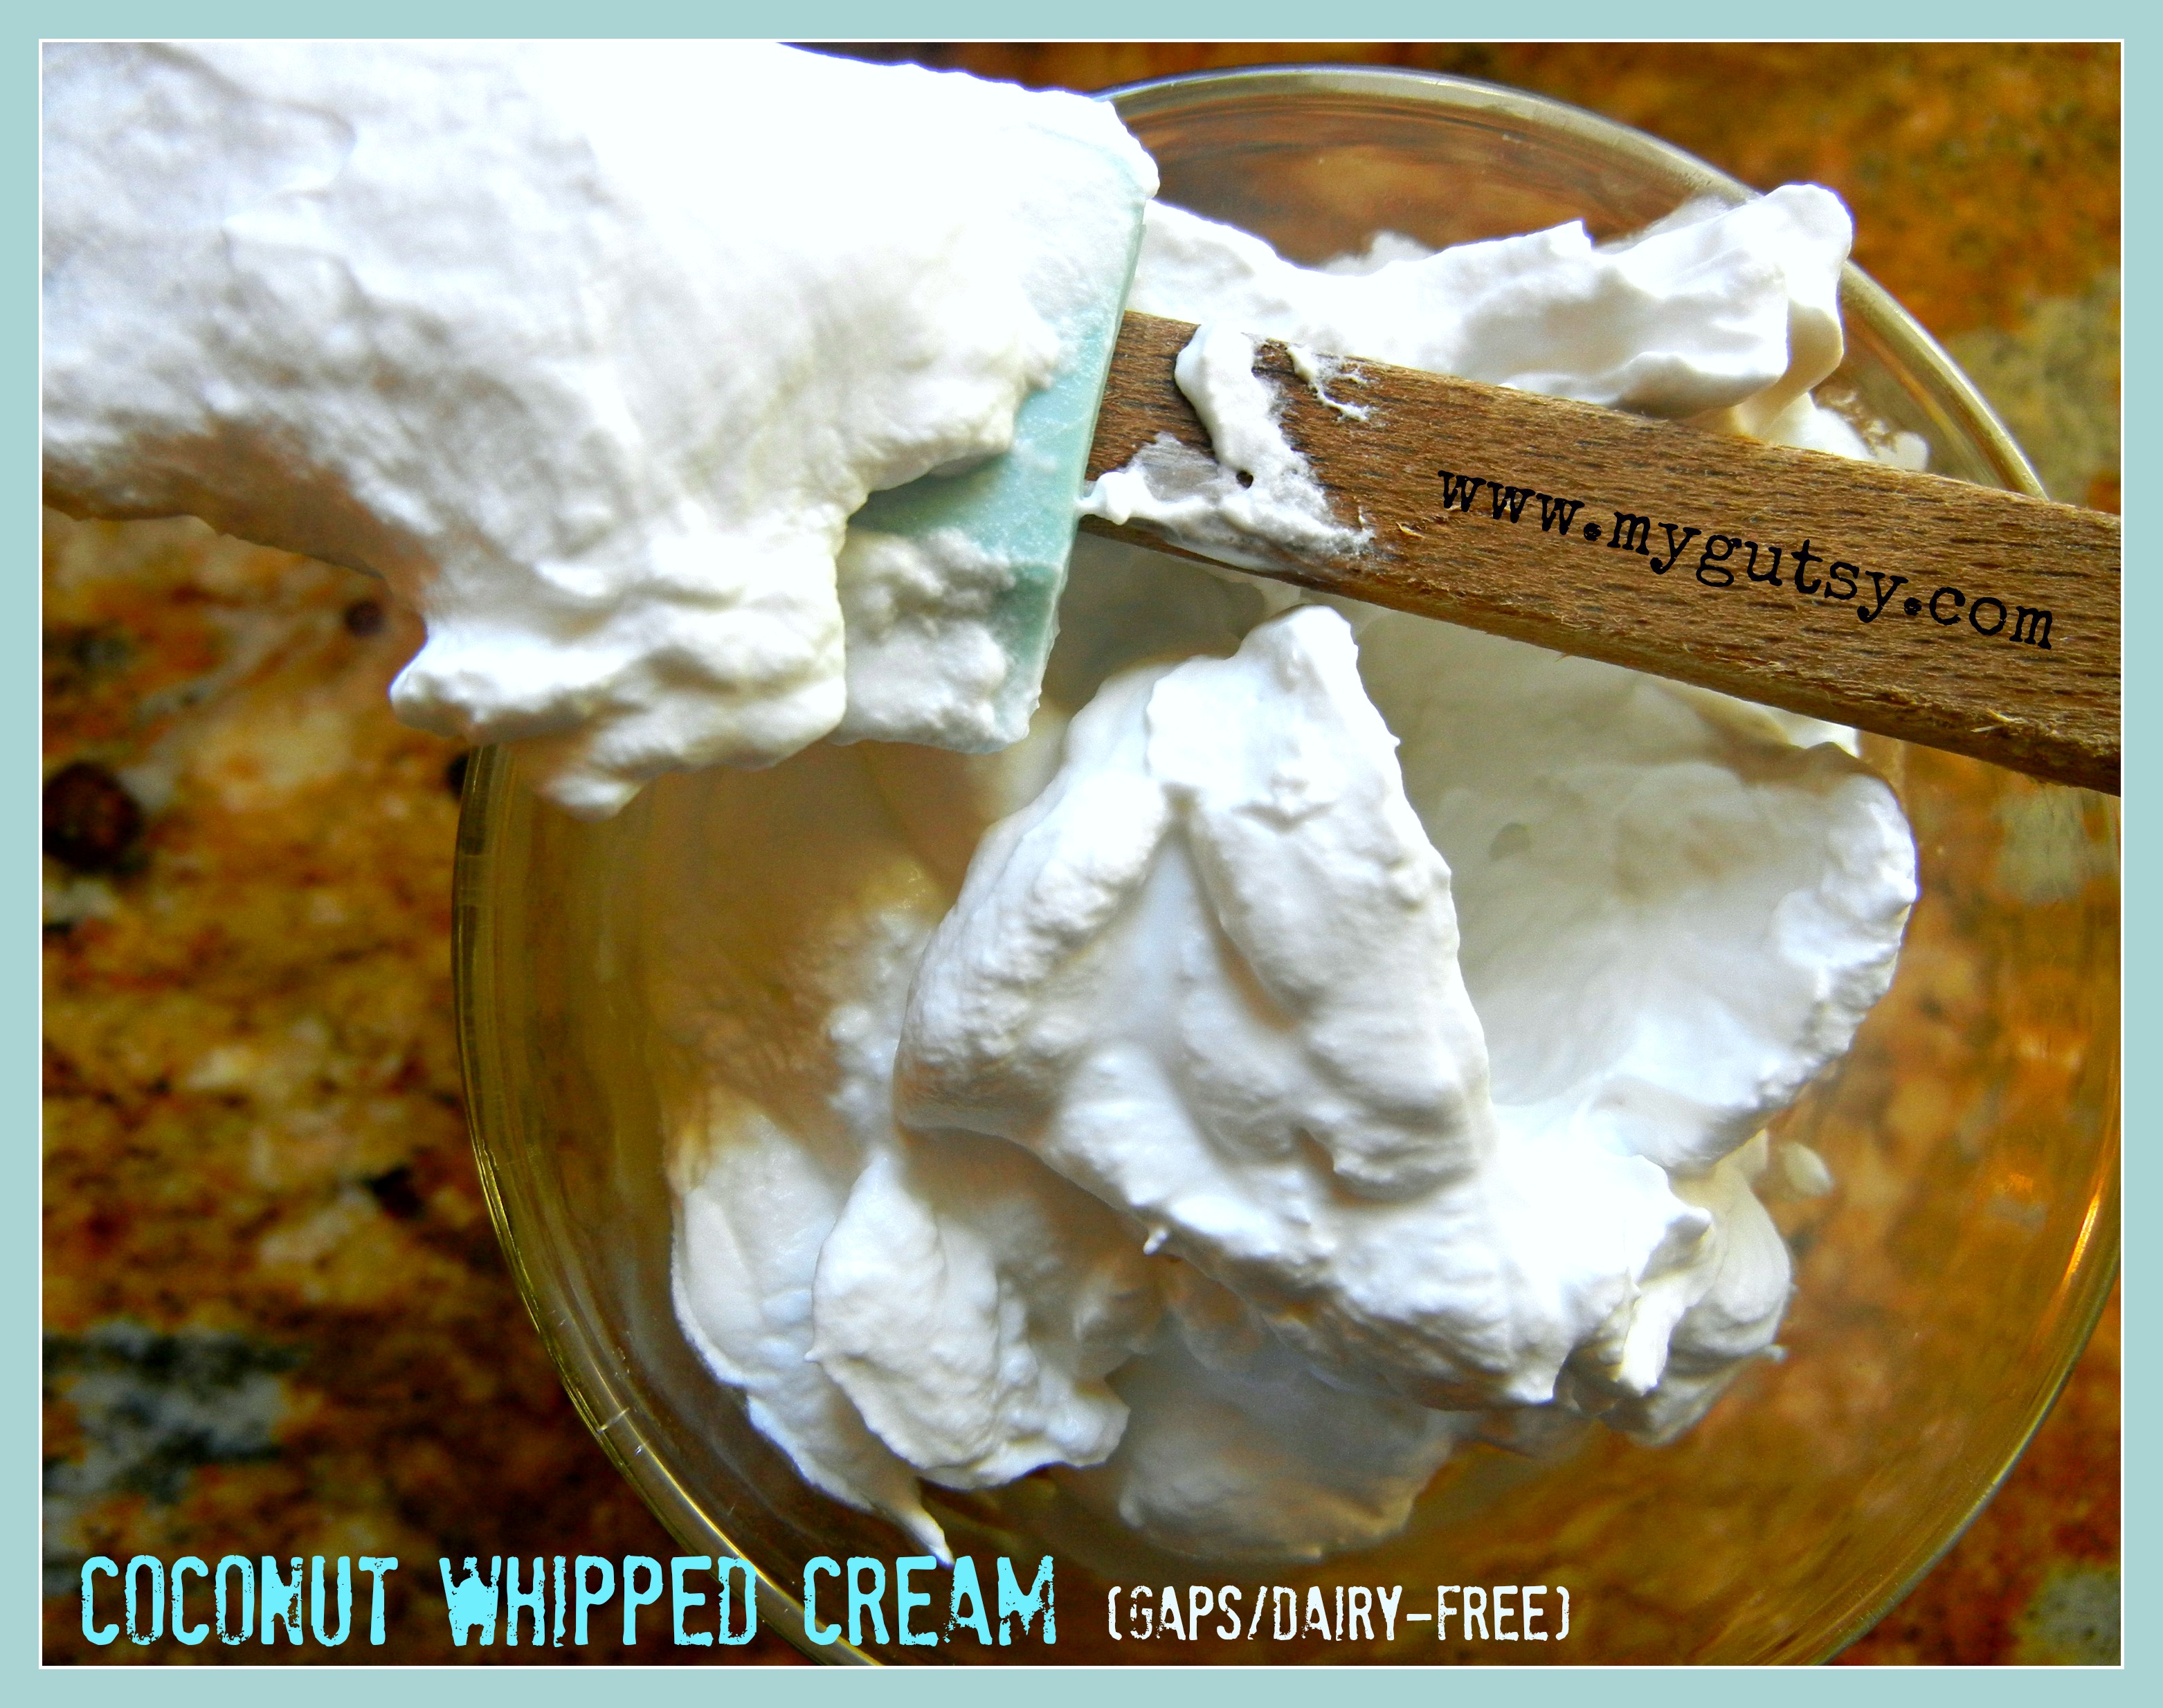 Whipped Cream Cans